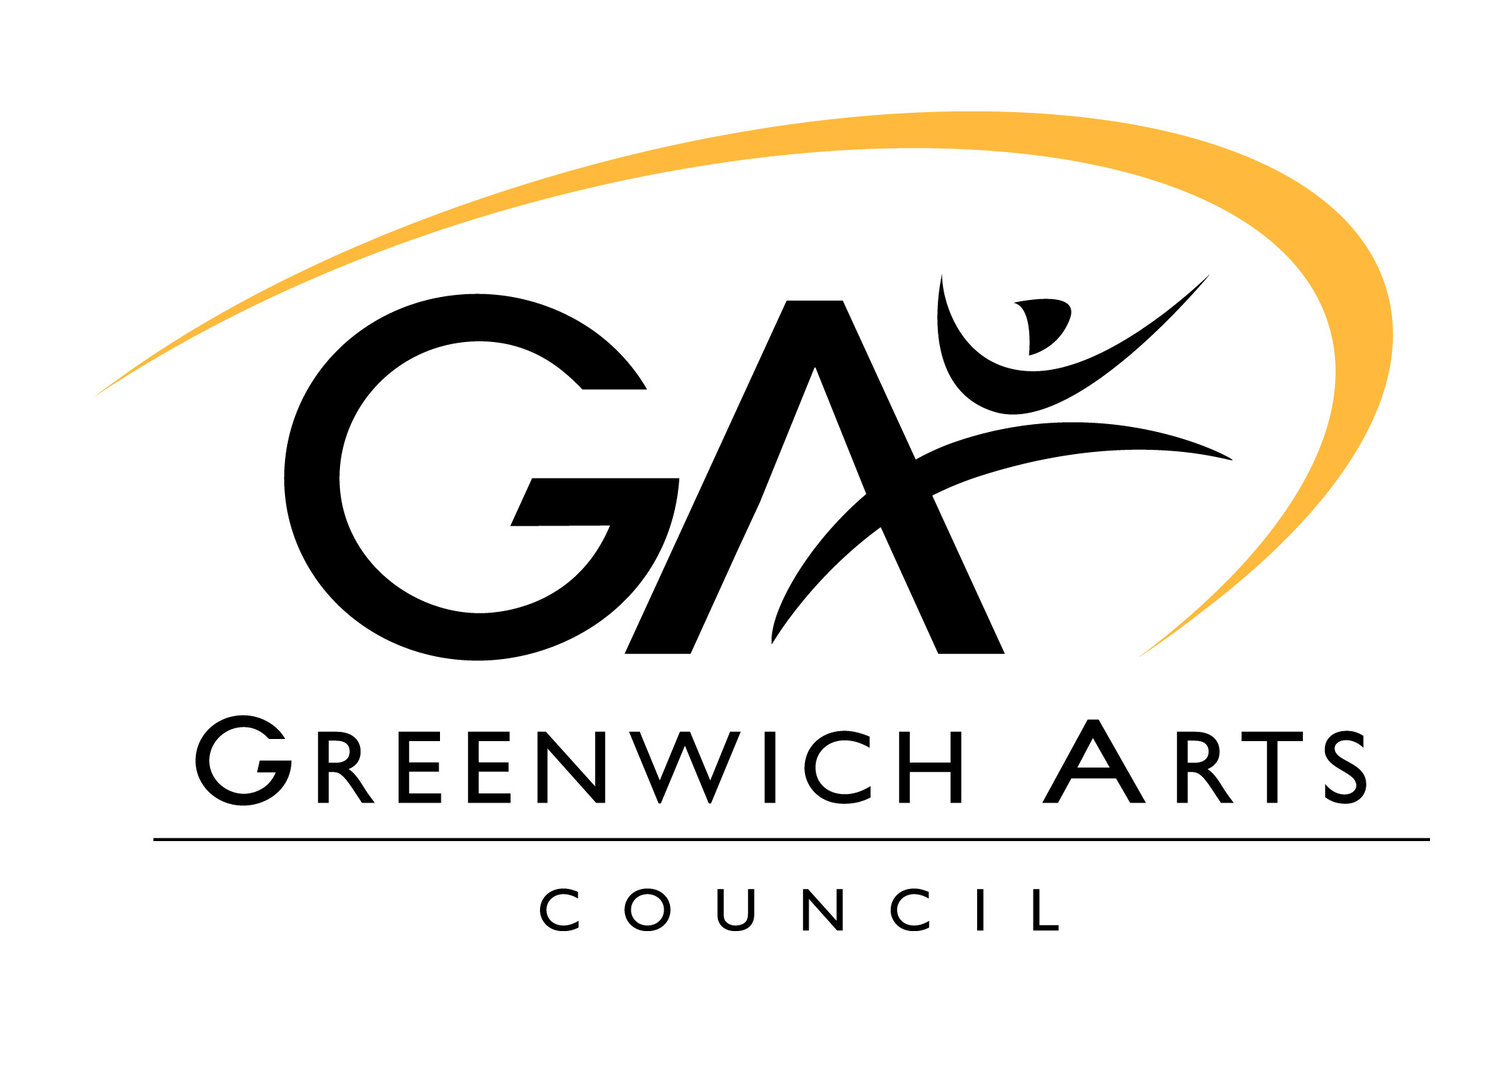 The Greenwich Arts Council